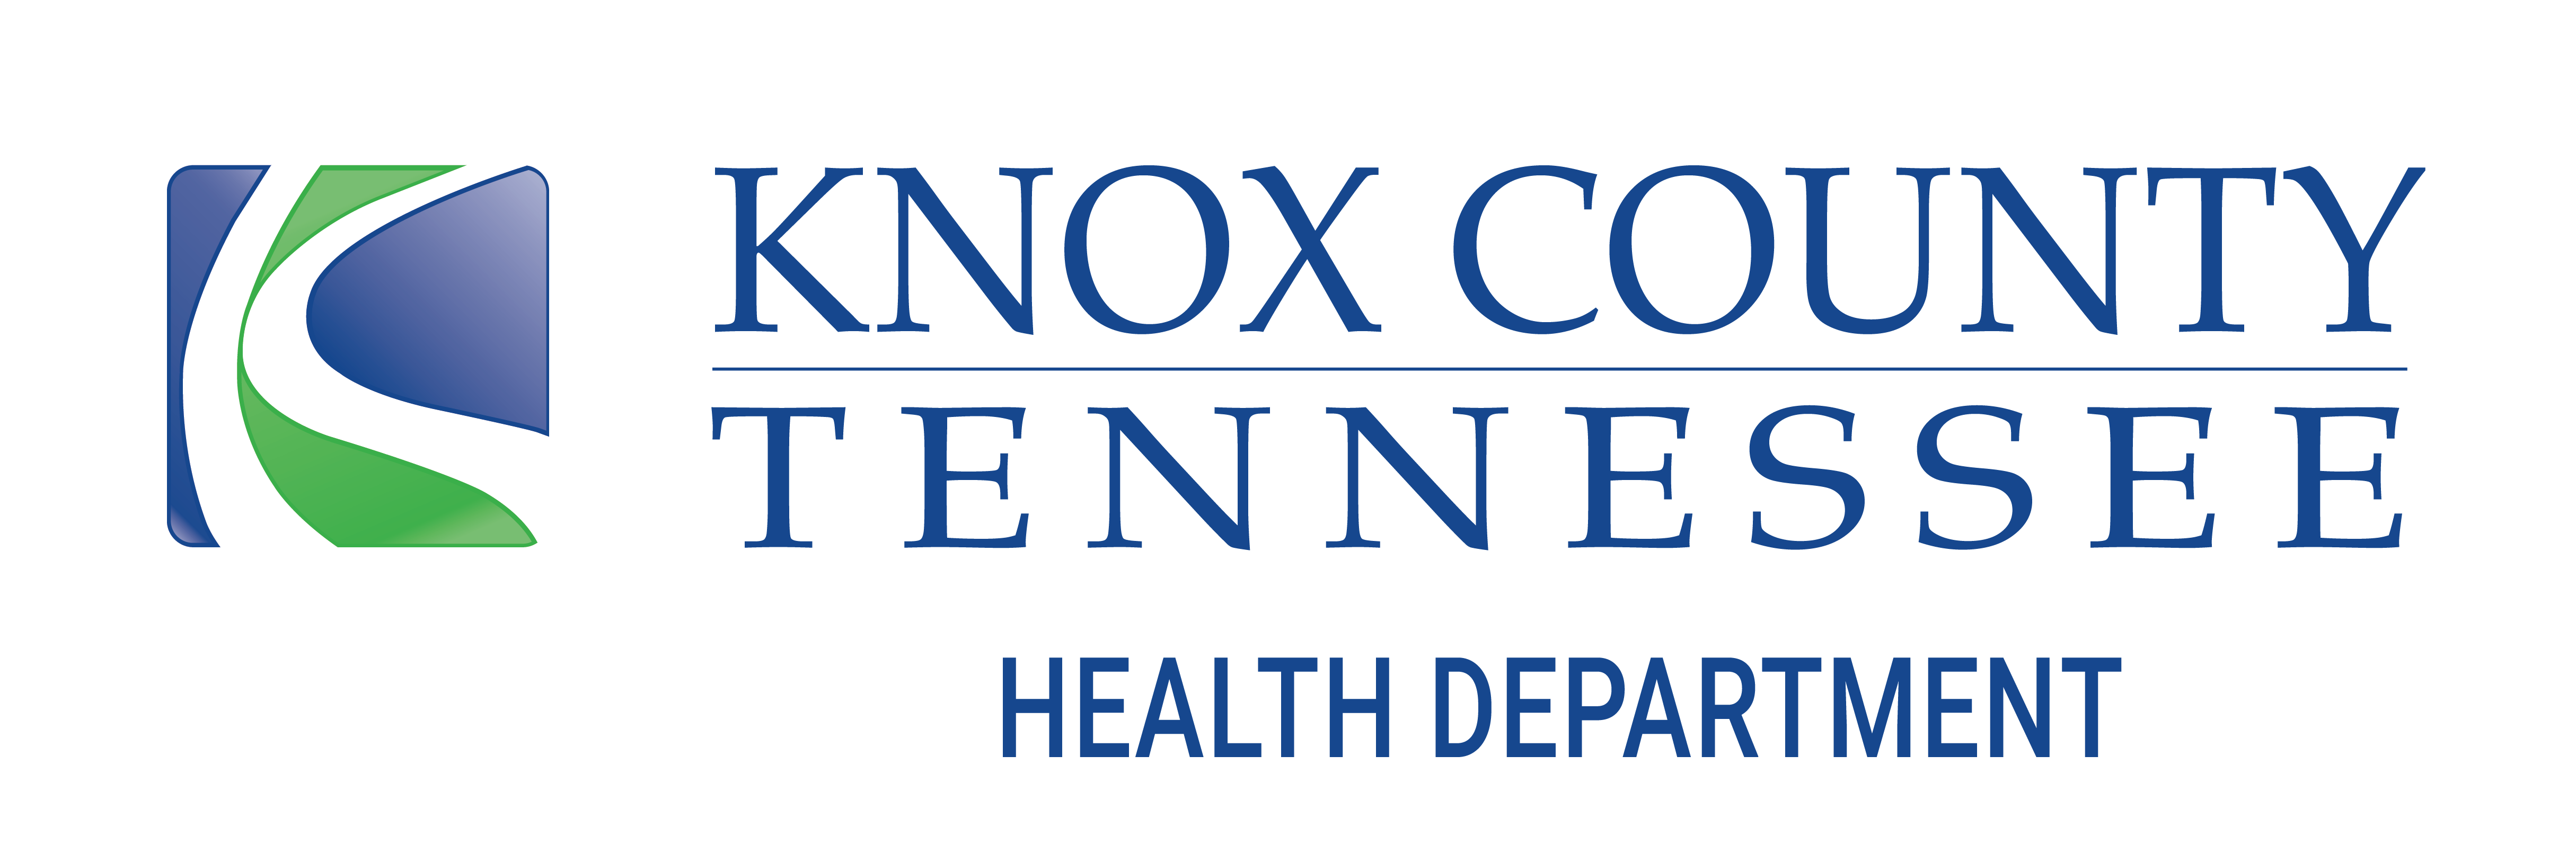 Knox County Tennessee - Health Department